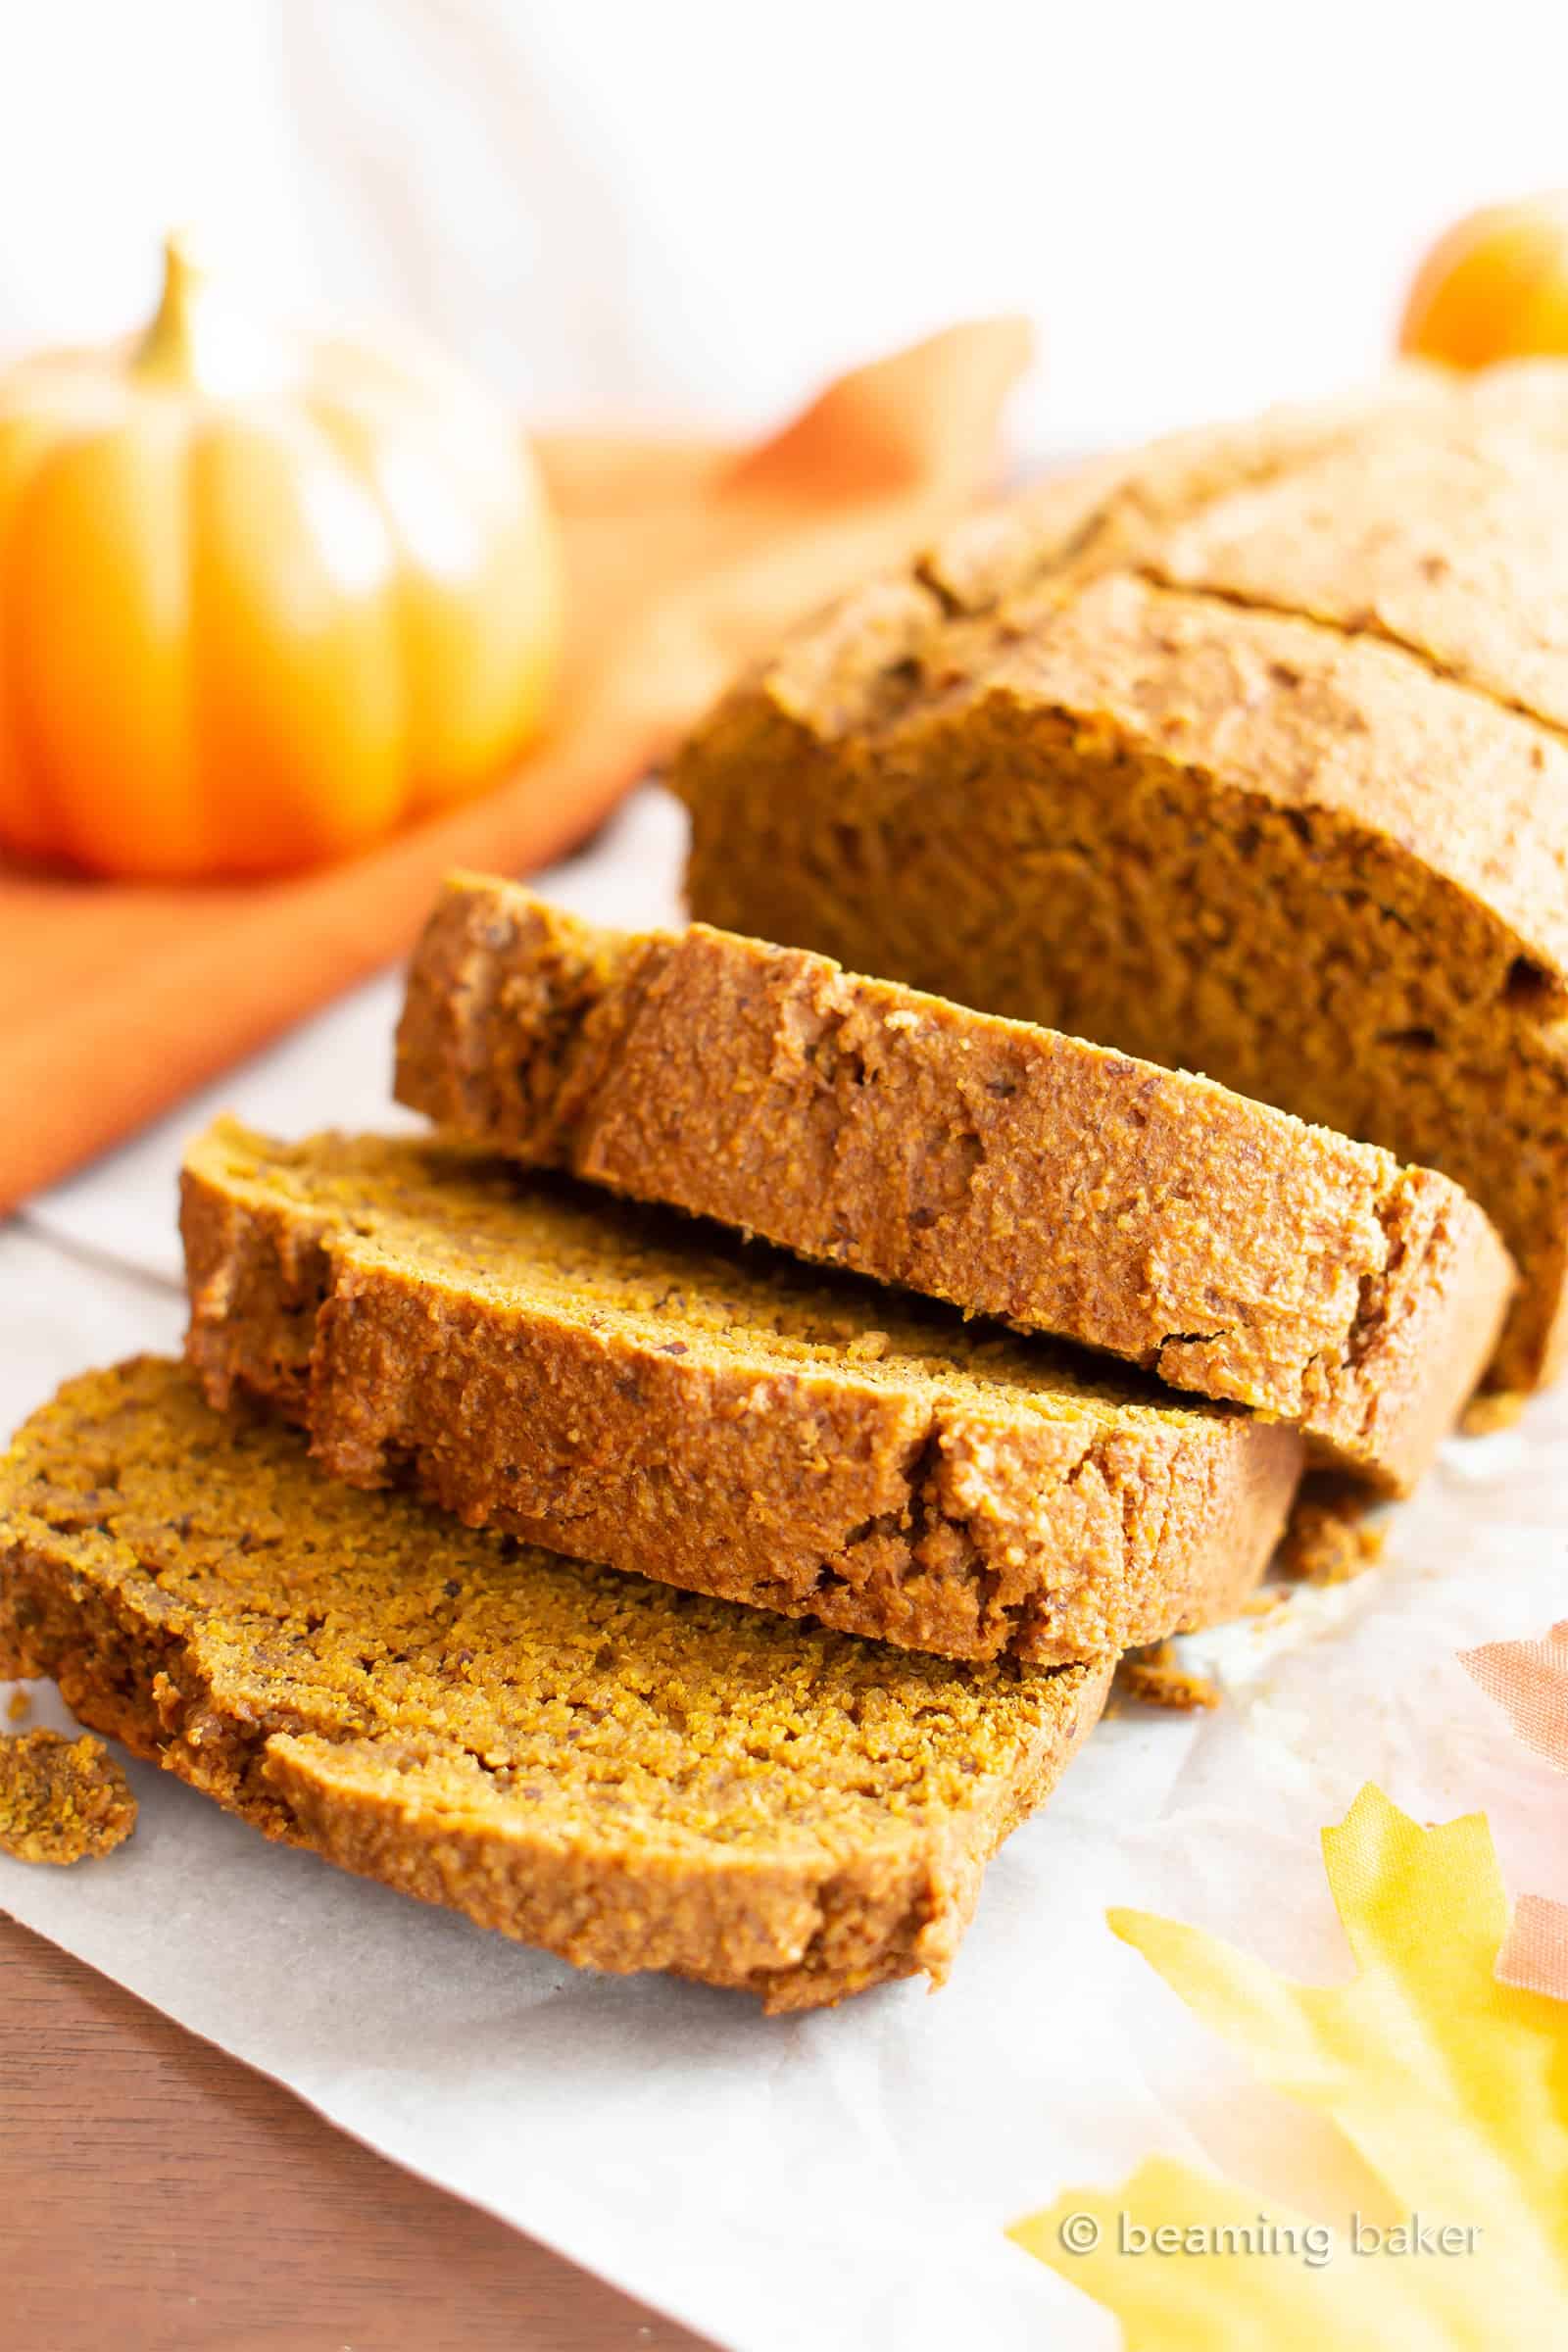 15 Easy Vegan Pumpkin Desserts (GF): an amazing collection of easy pumpkin dessert recipes that are vegan, gluten-free and healthy! The best pumpkin desserts, packed with your favorite fall flavors! #Healthy #Vegan #GlutenFree #Pumpkin #Dessert | Recipes at BeamingBaker.com